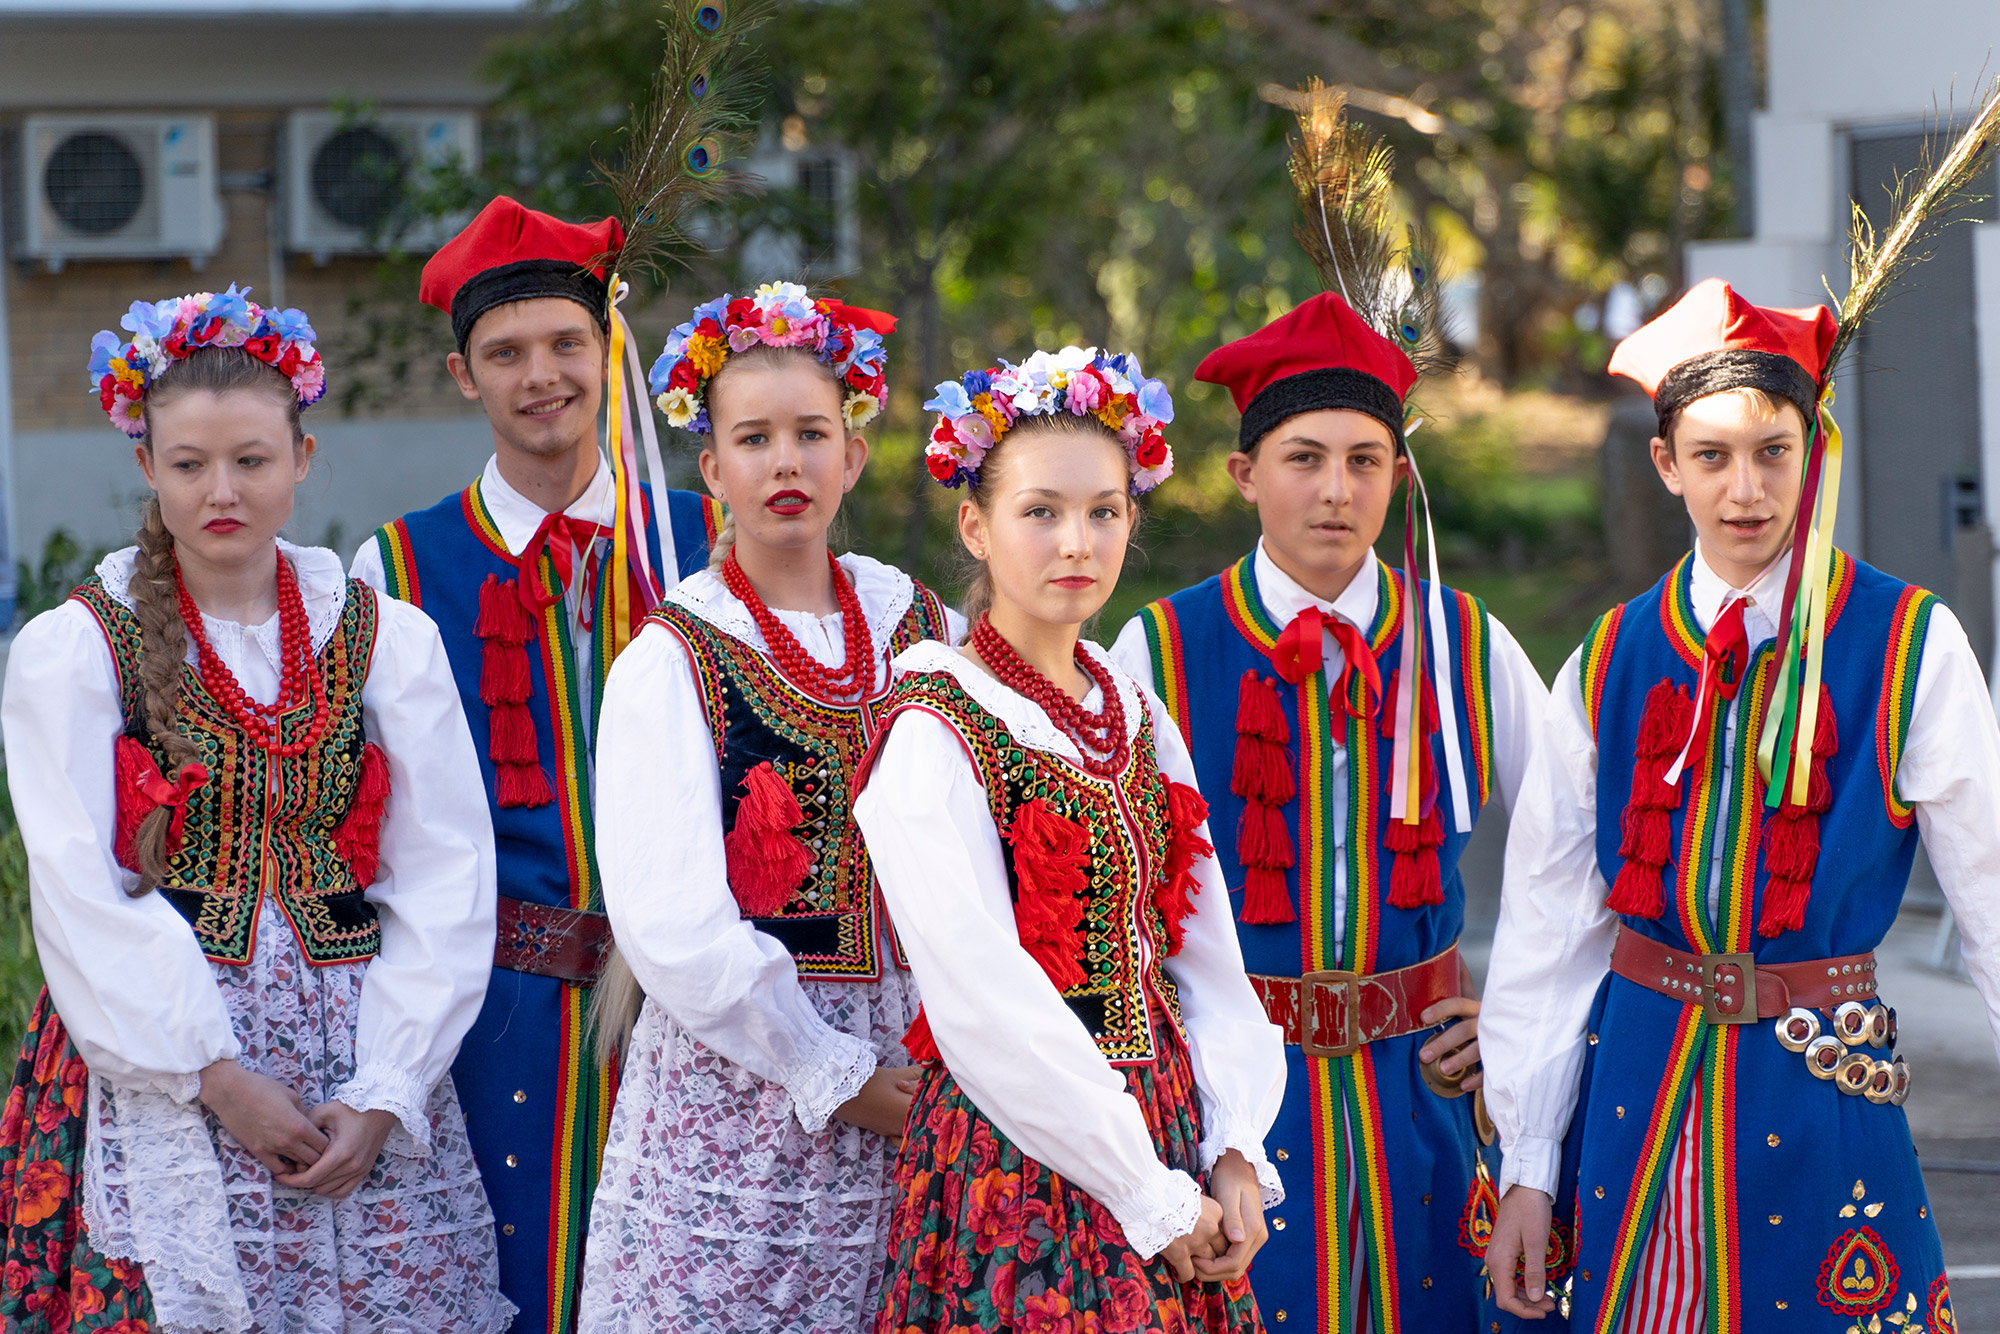 Members of Obertas Polish Folkloric Ensemble waiting to perform. They are dressed in colourful traditional Polish clothes, wearing flower crowns or peacock feathers.